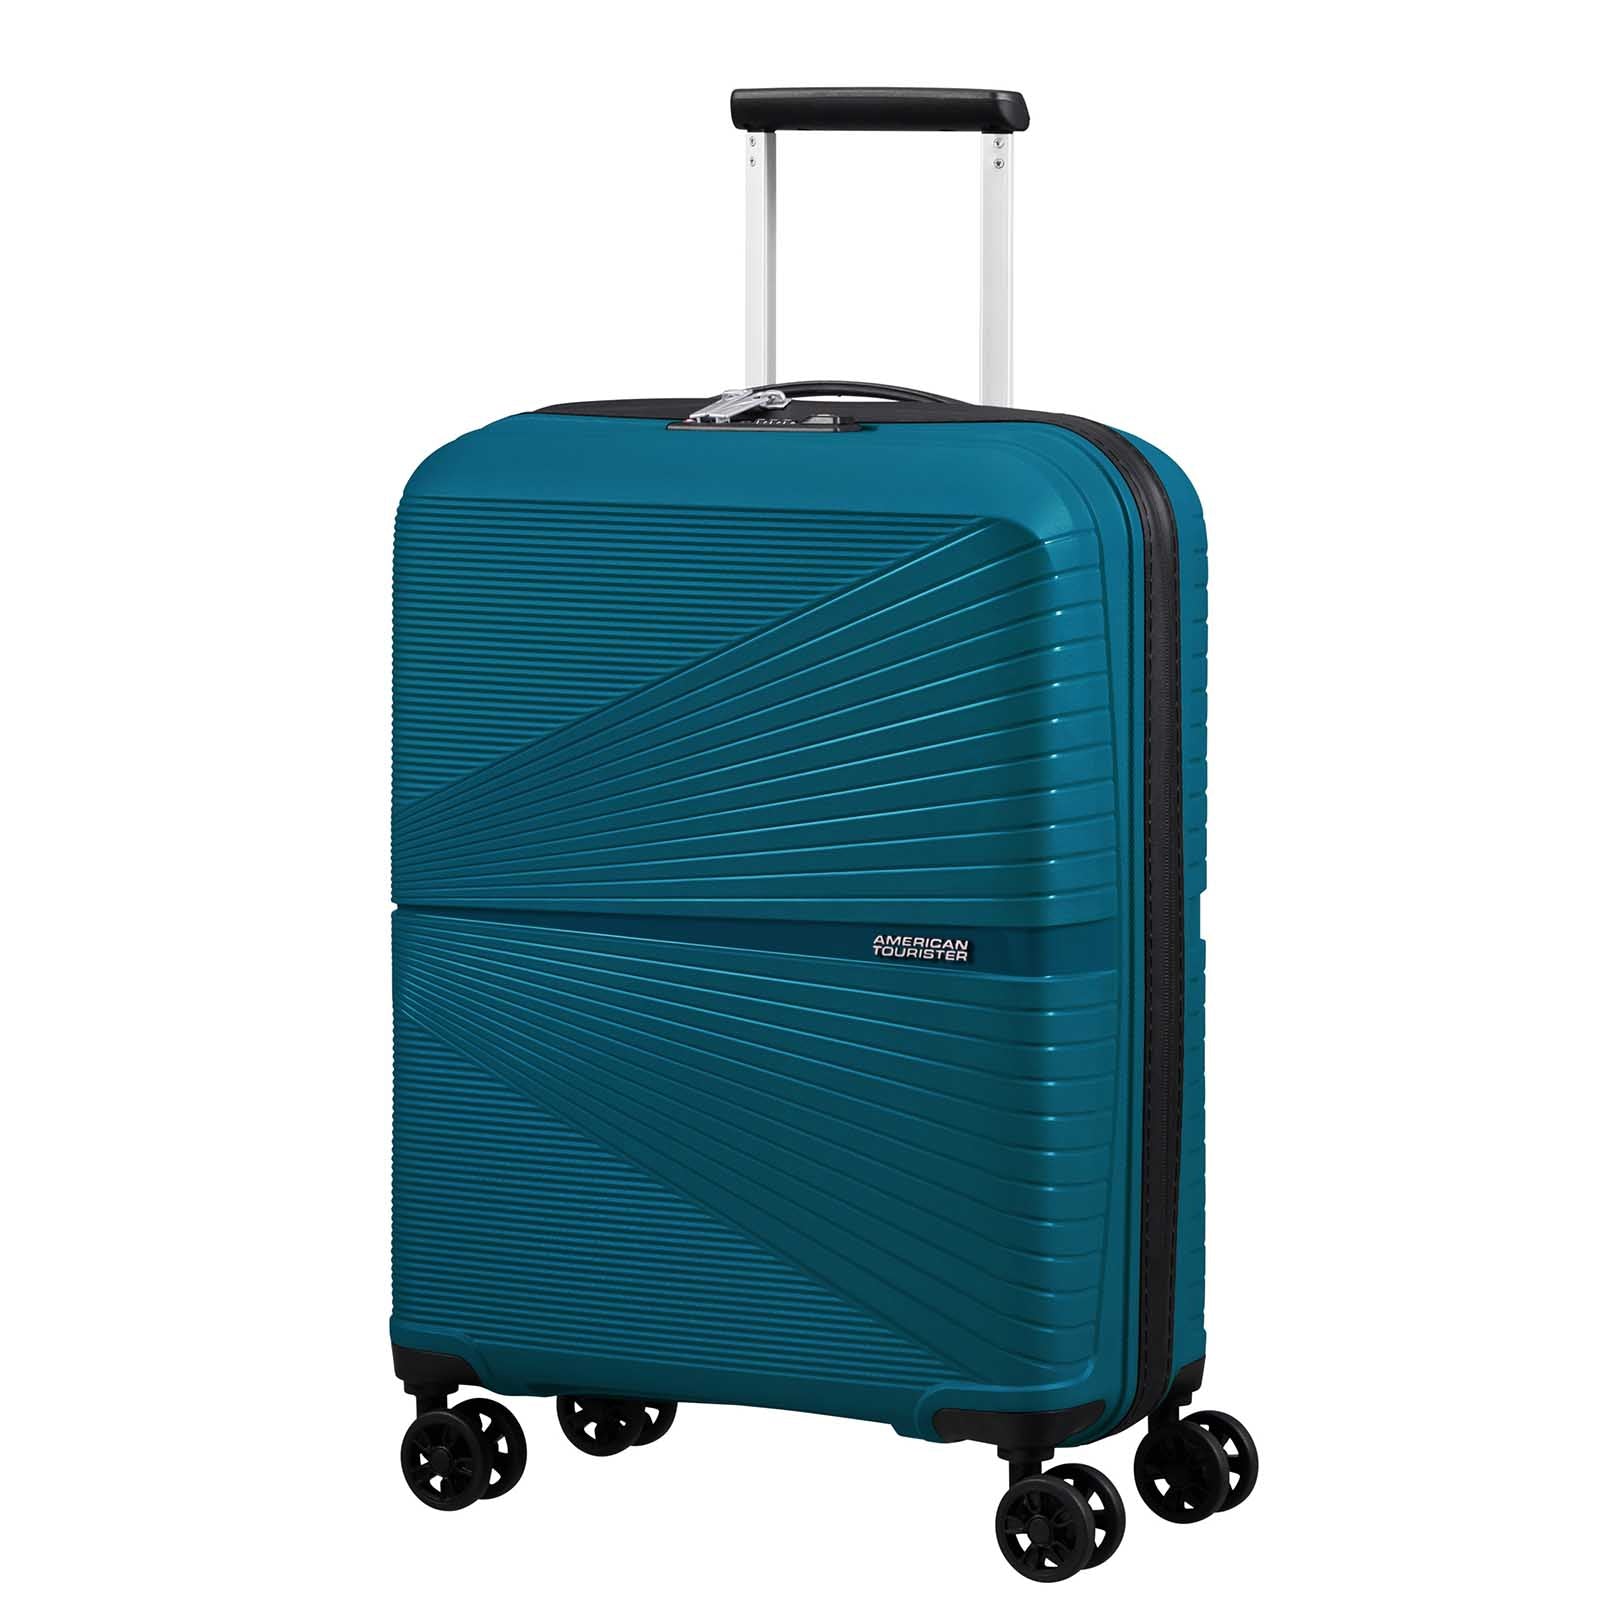 American-Tourister-Airconic-55cm-Carry-On-Suitcase-Deep-Ocean-Front-Angle